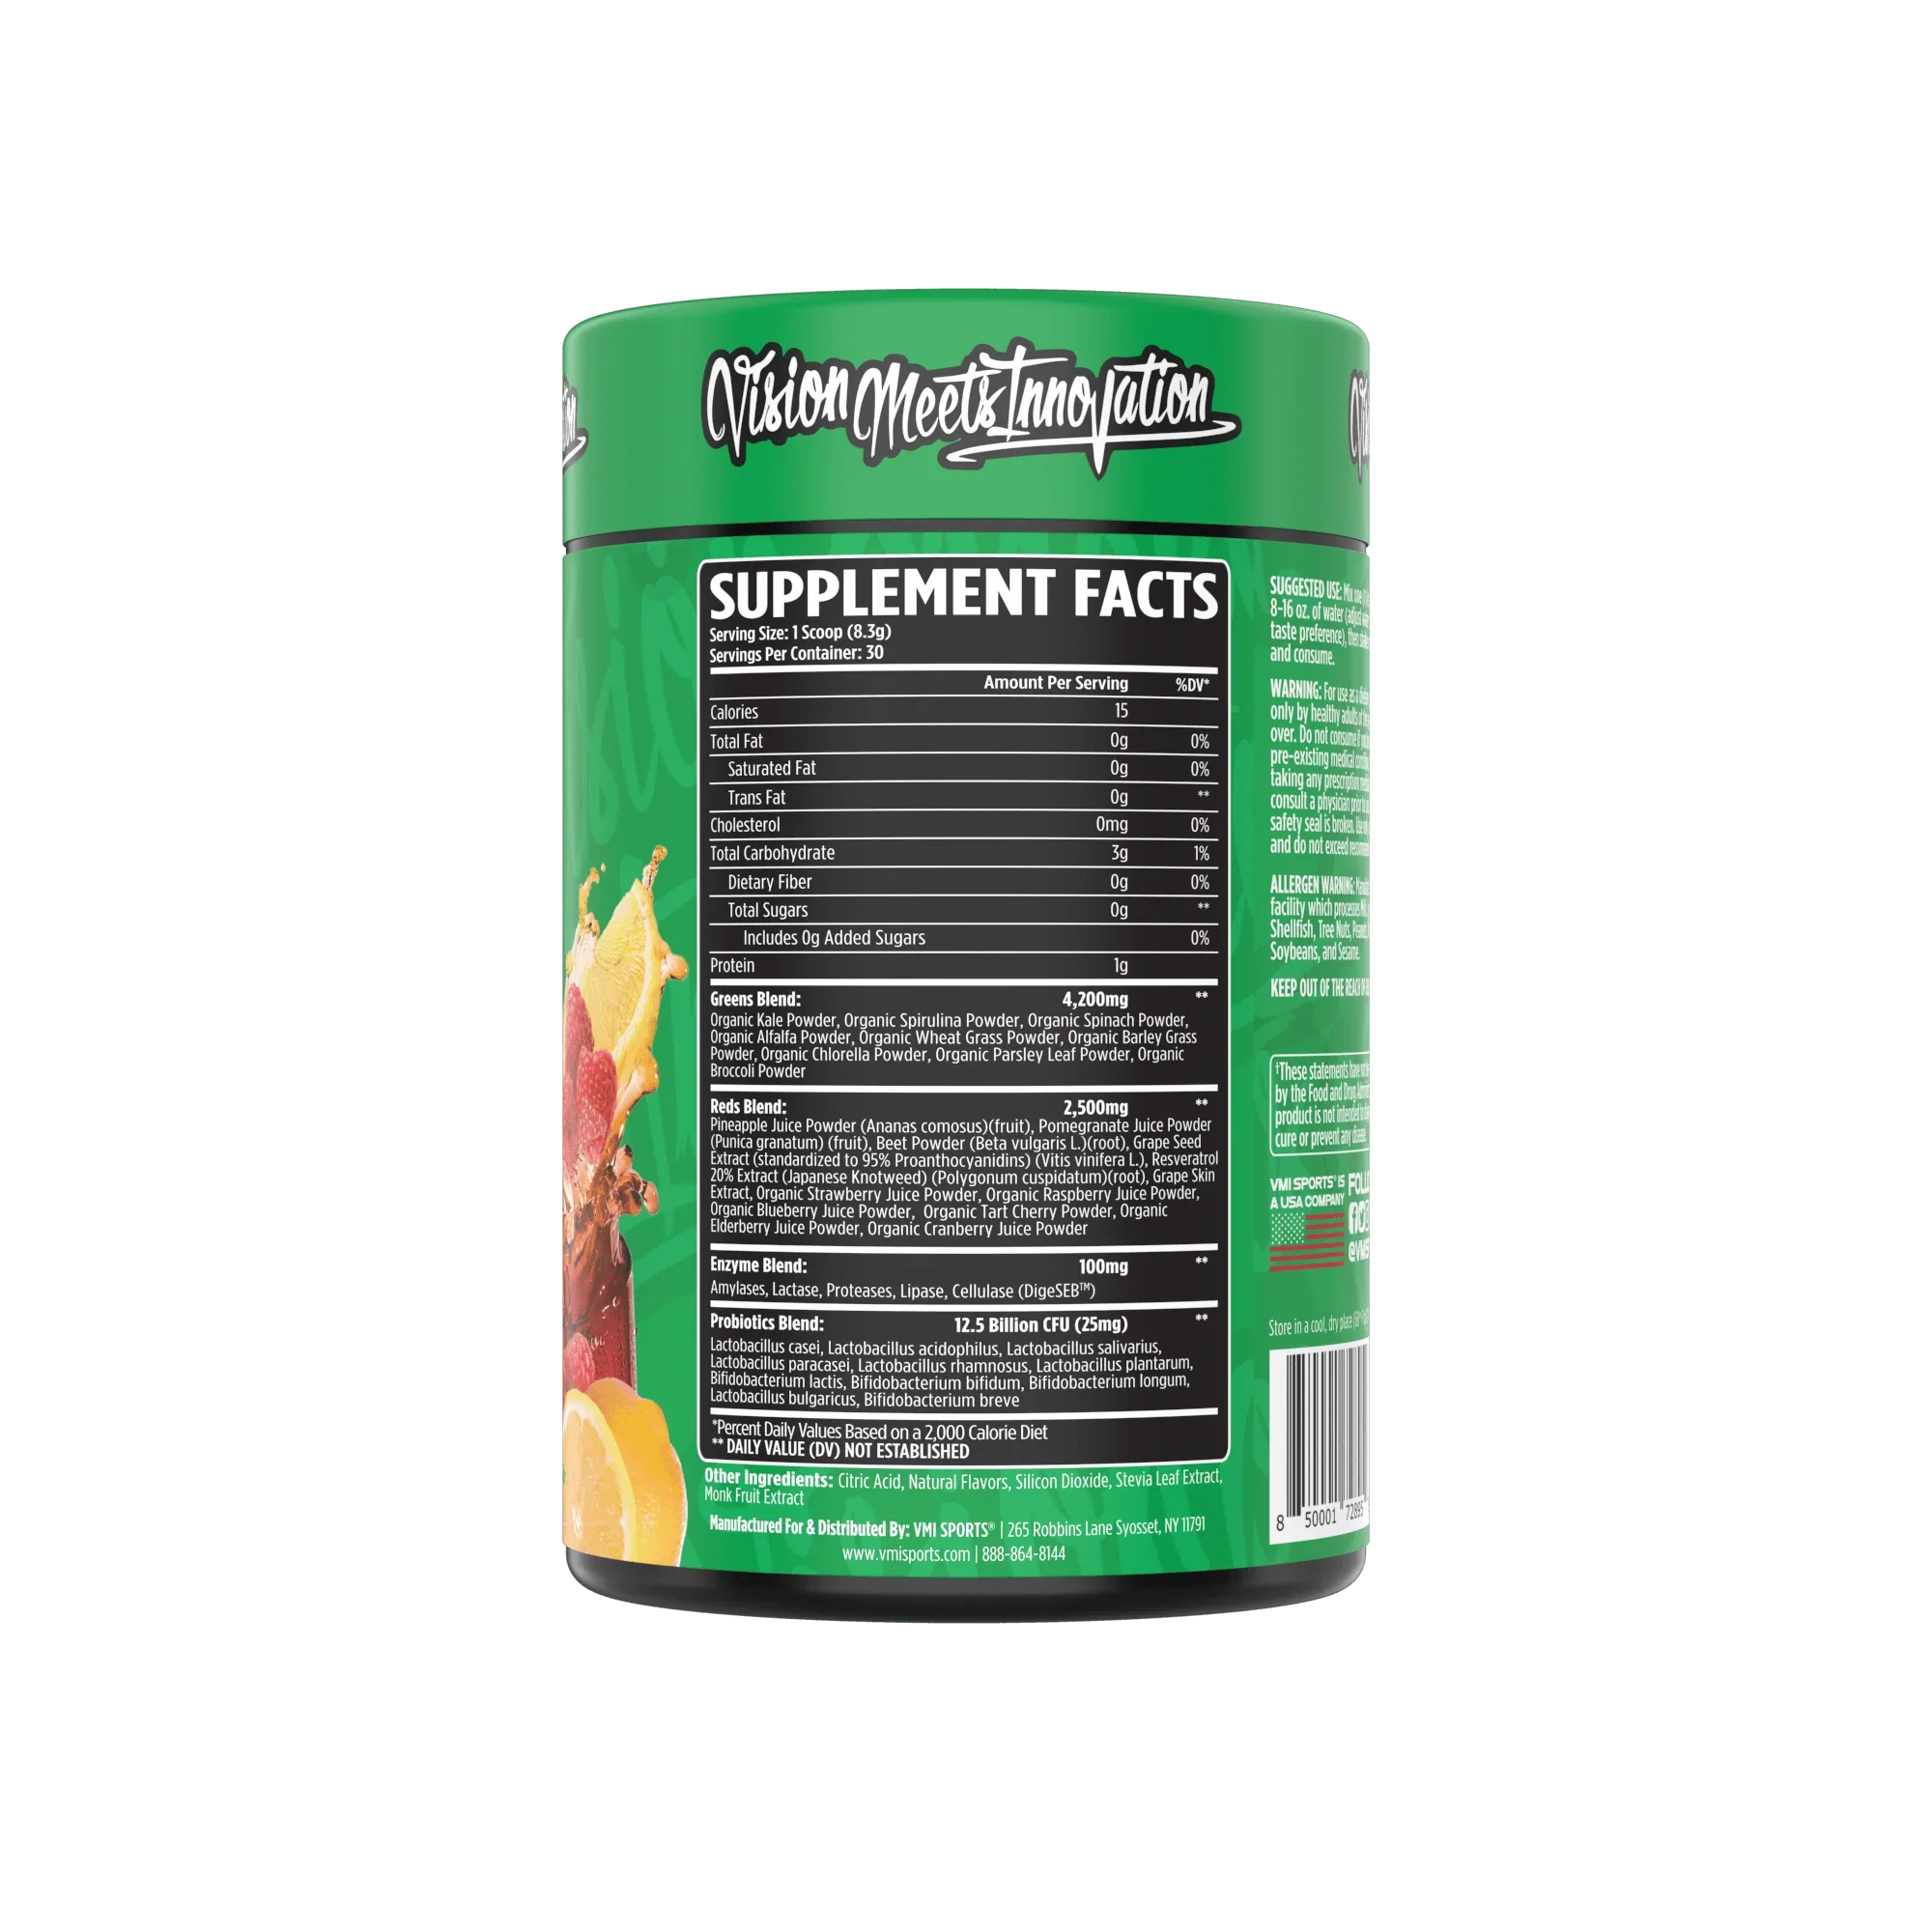 VMI All Natural Greens + Reds Superfoods 30 Servings (Strawberry Kiwi)